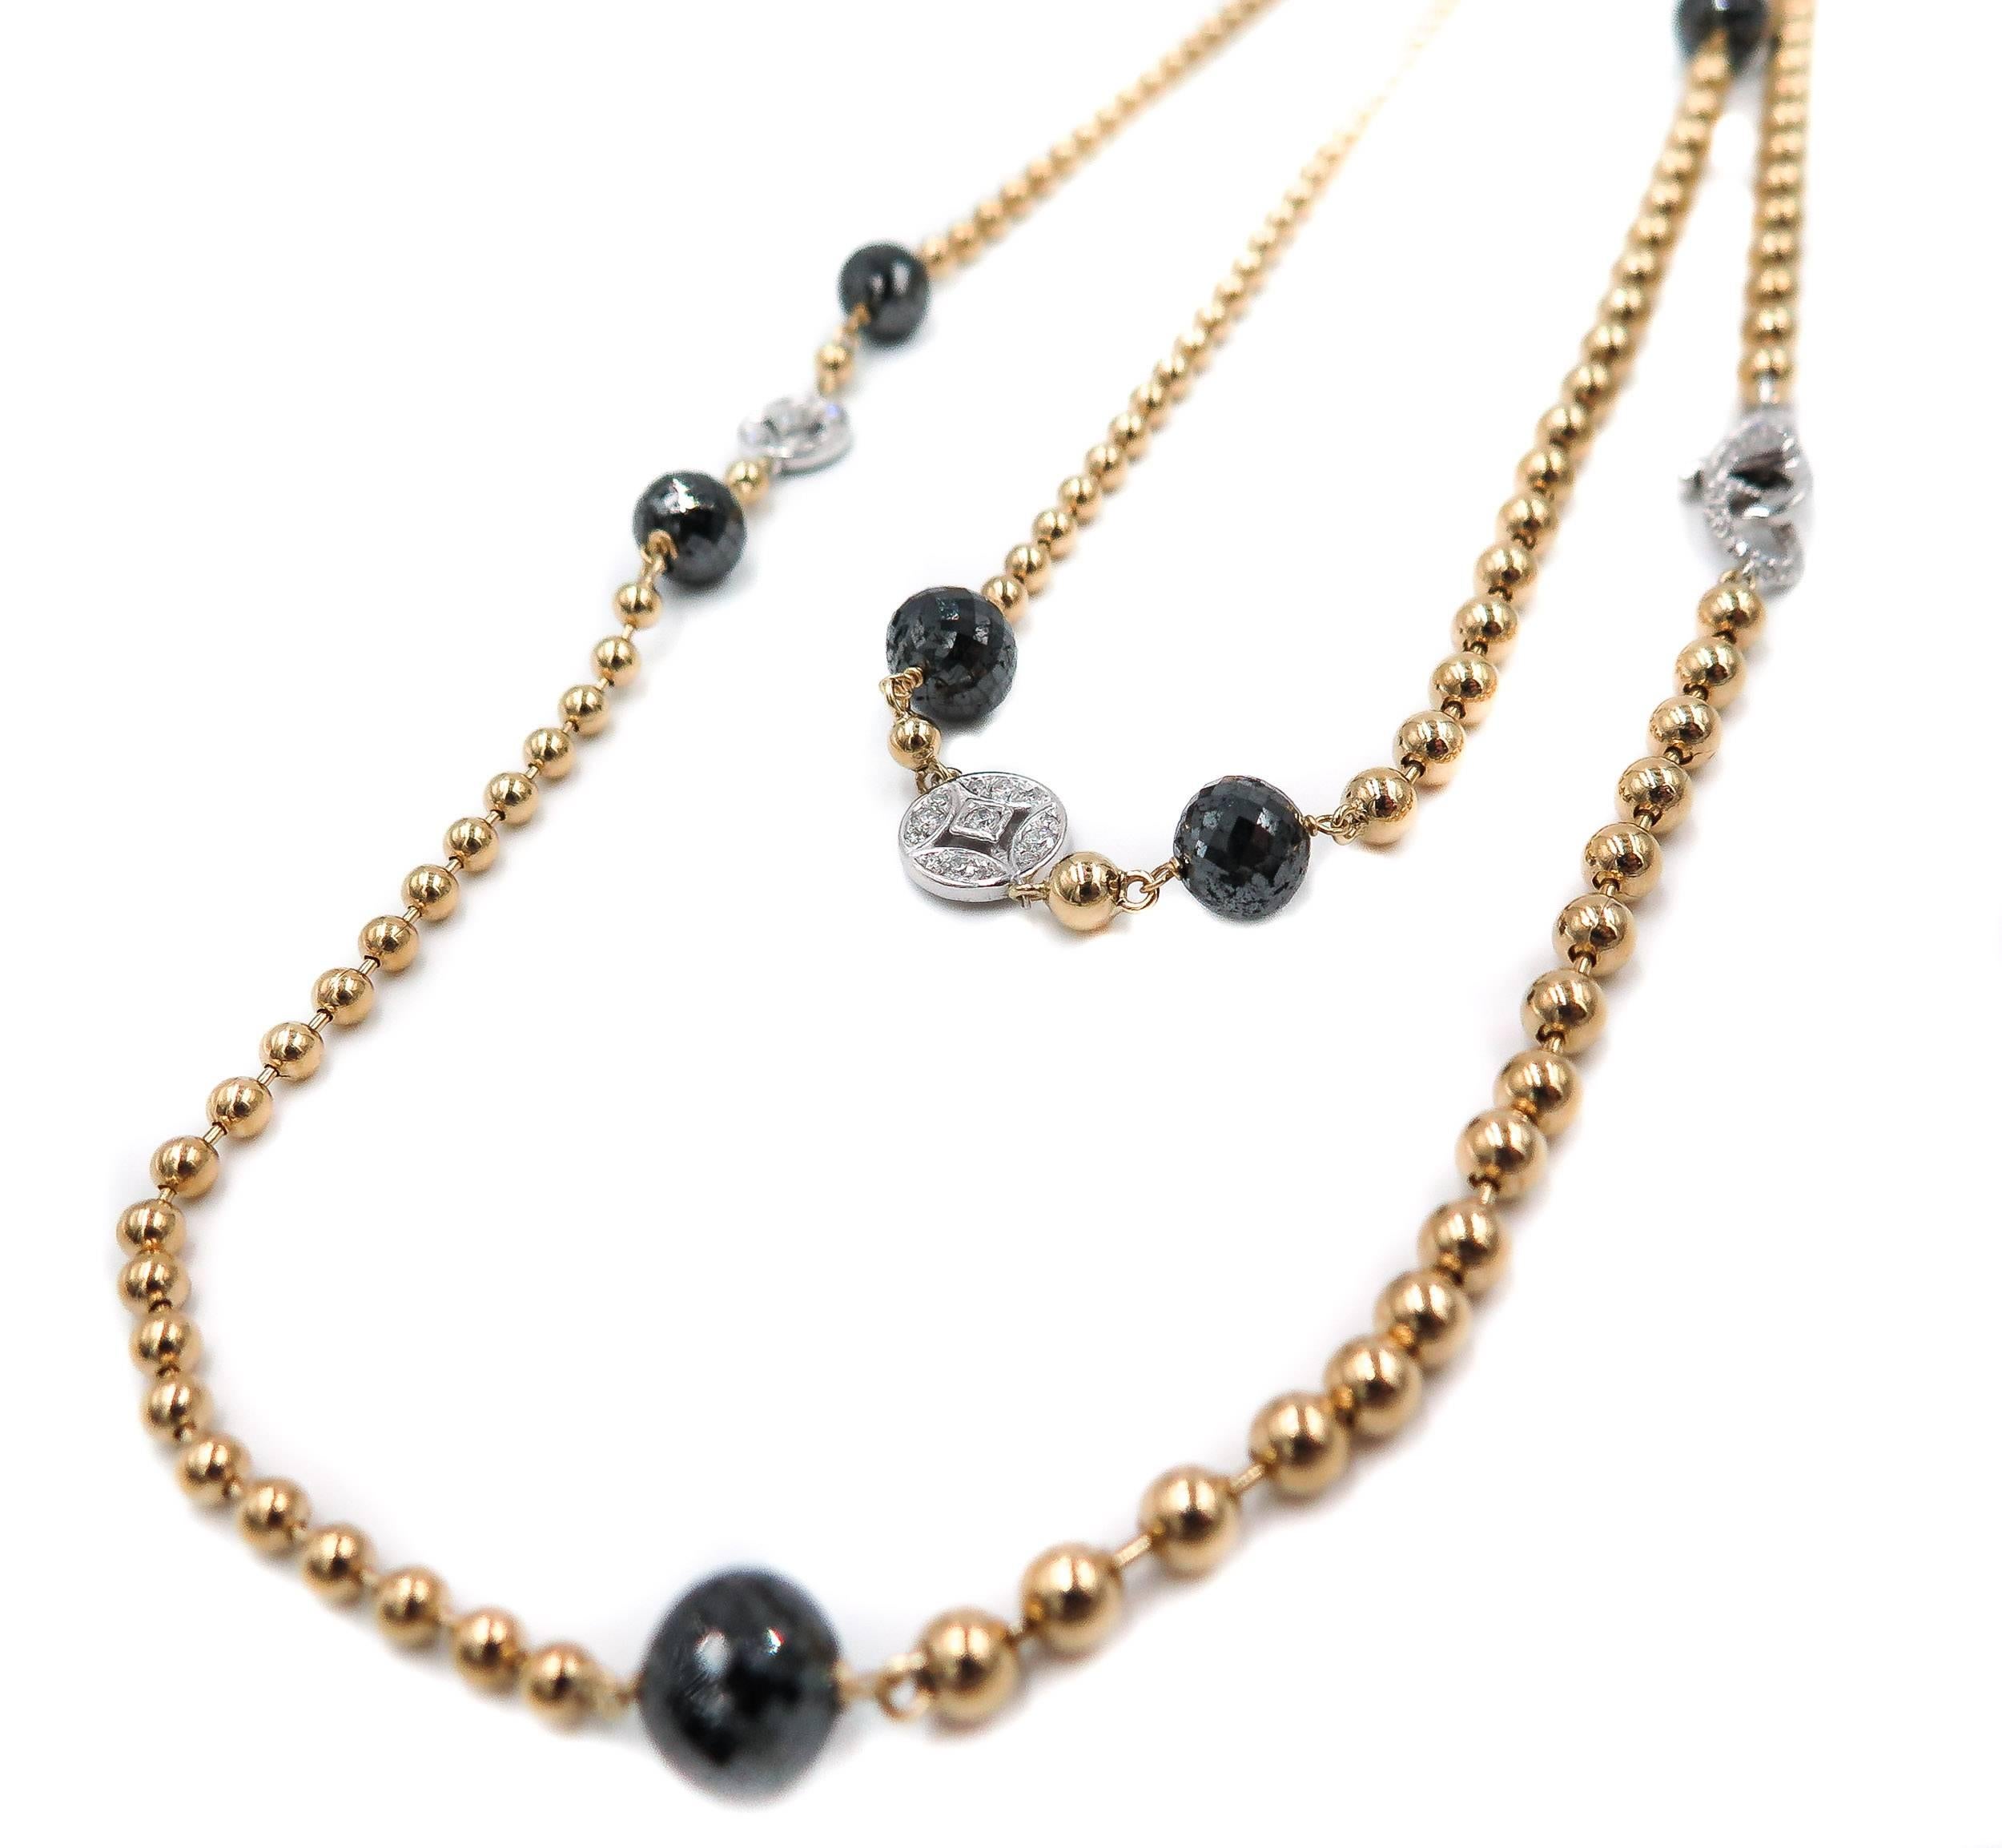 Elegant and gracious, this 45 inch long necklace is the perfect compliment to your outfit. Versatile and easy to wear accessorize a long dress or a pair of jeans with t-shirt.
Handcrafted in Italy by a master jeweler in 18k yellow gold with faceted